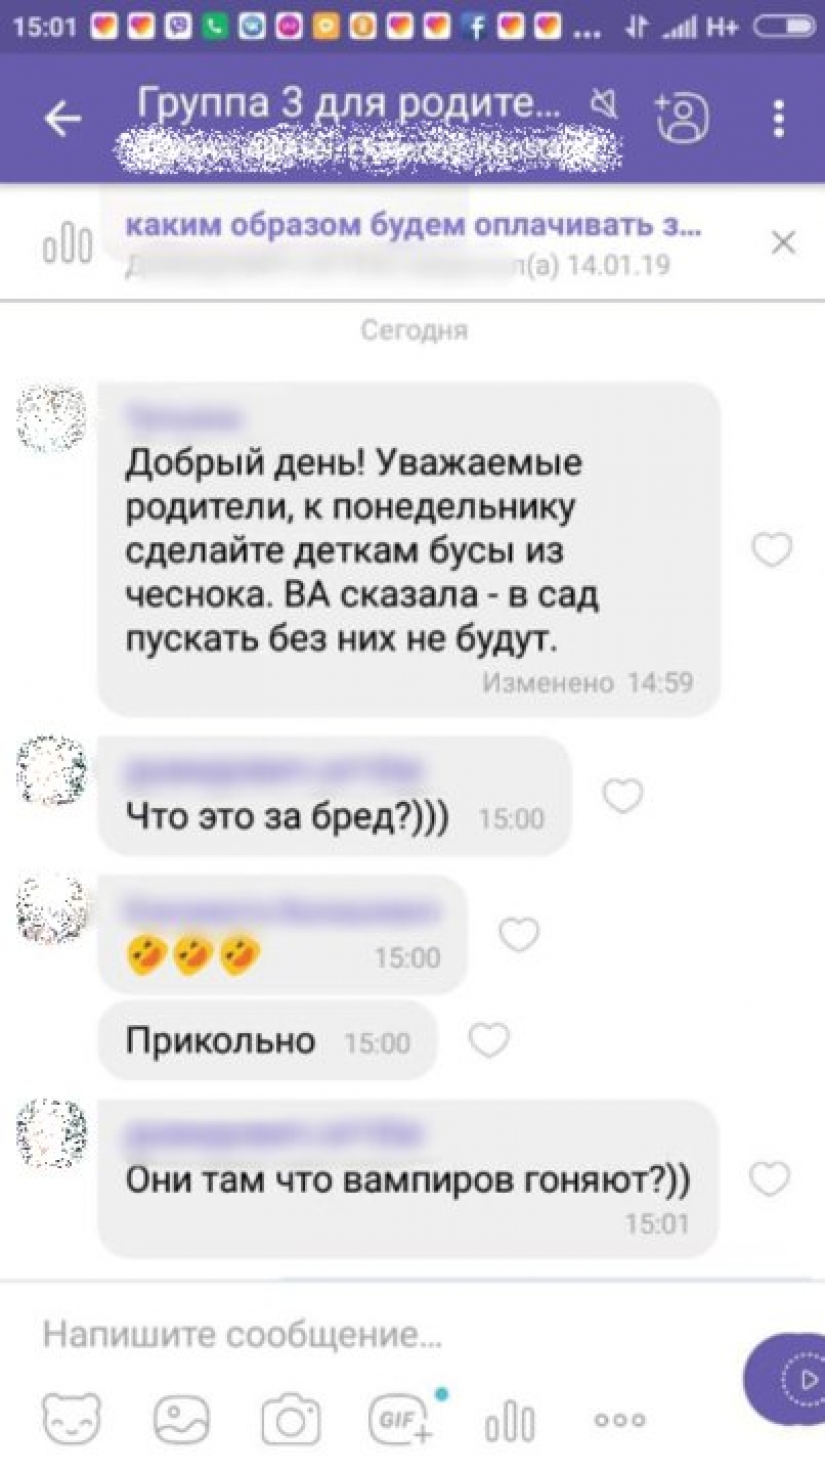 "My Kolya bite your Petenka": 6 types of parents from the chat, which will drive crazy anyone